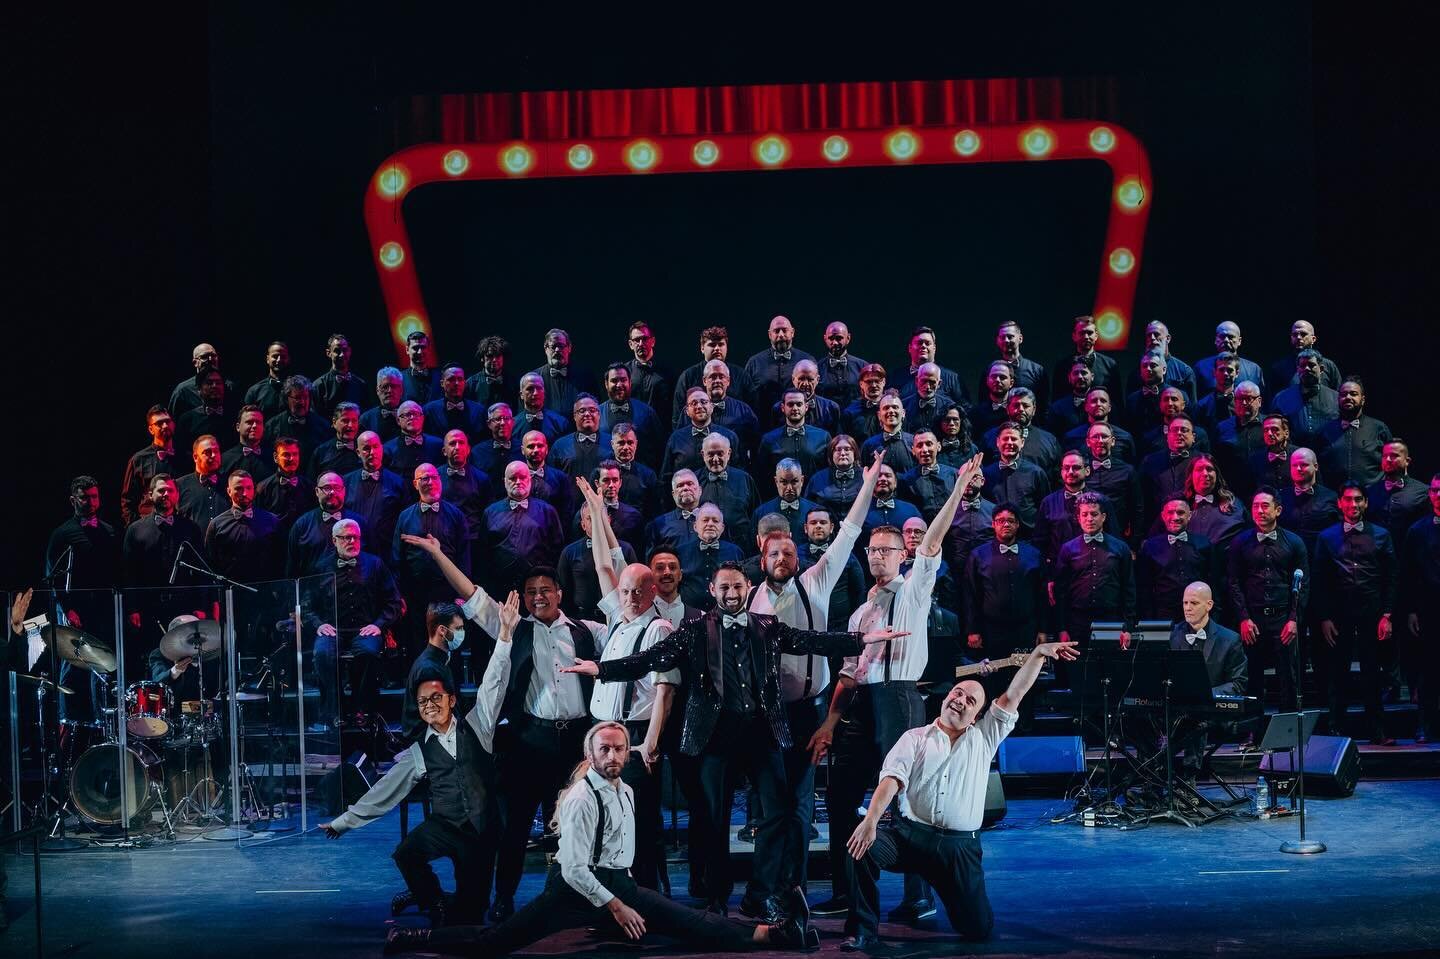 What an amazing weekend this was for us. Definitely one for the books! We couldn&rsquo;t have imagined a better outcome. Thank you for coming and Singing OUT!

📸 credit: @joemaccreative 

#singoutlouise #broadway #philagmc #pgmc #happysaintpatricksd